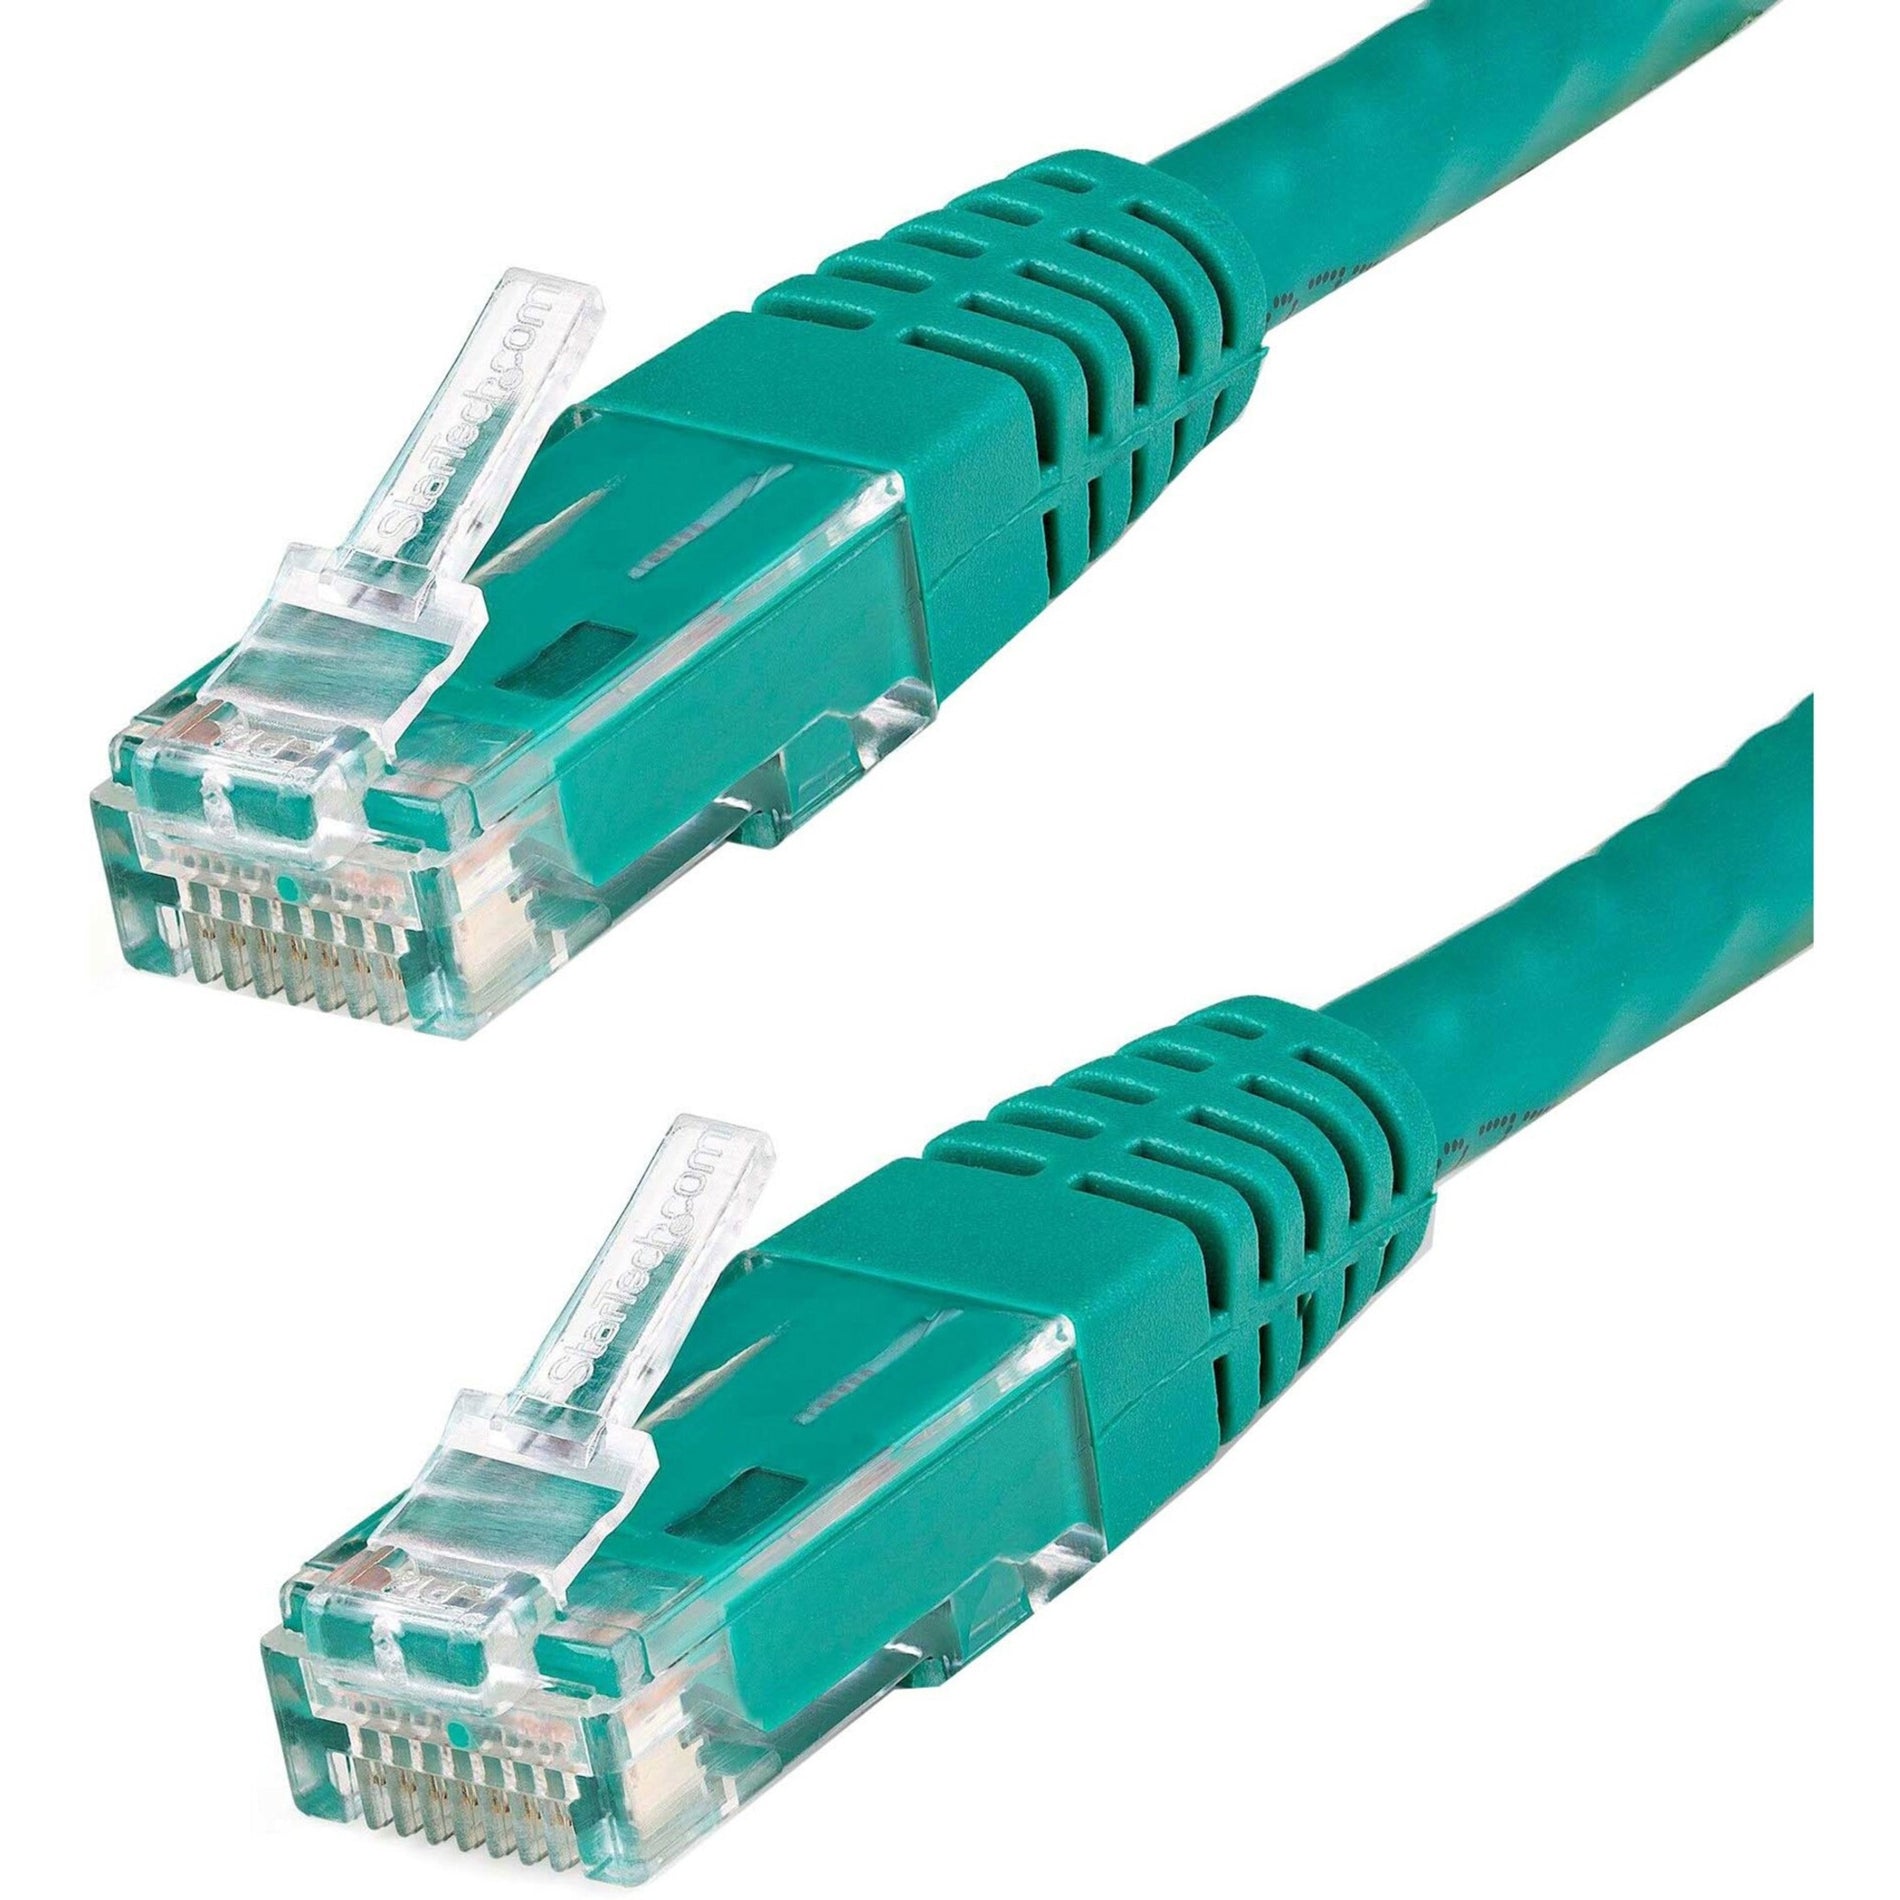 StarTech.com C6PATCH15GN 15ft Green Molded Cat6 UTP Patch Cable ETL Verified, 10 Gbit/s Data Transfer Rate, PoE+, Snagless Boot